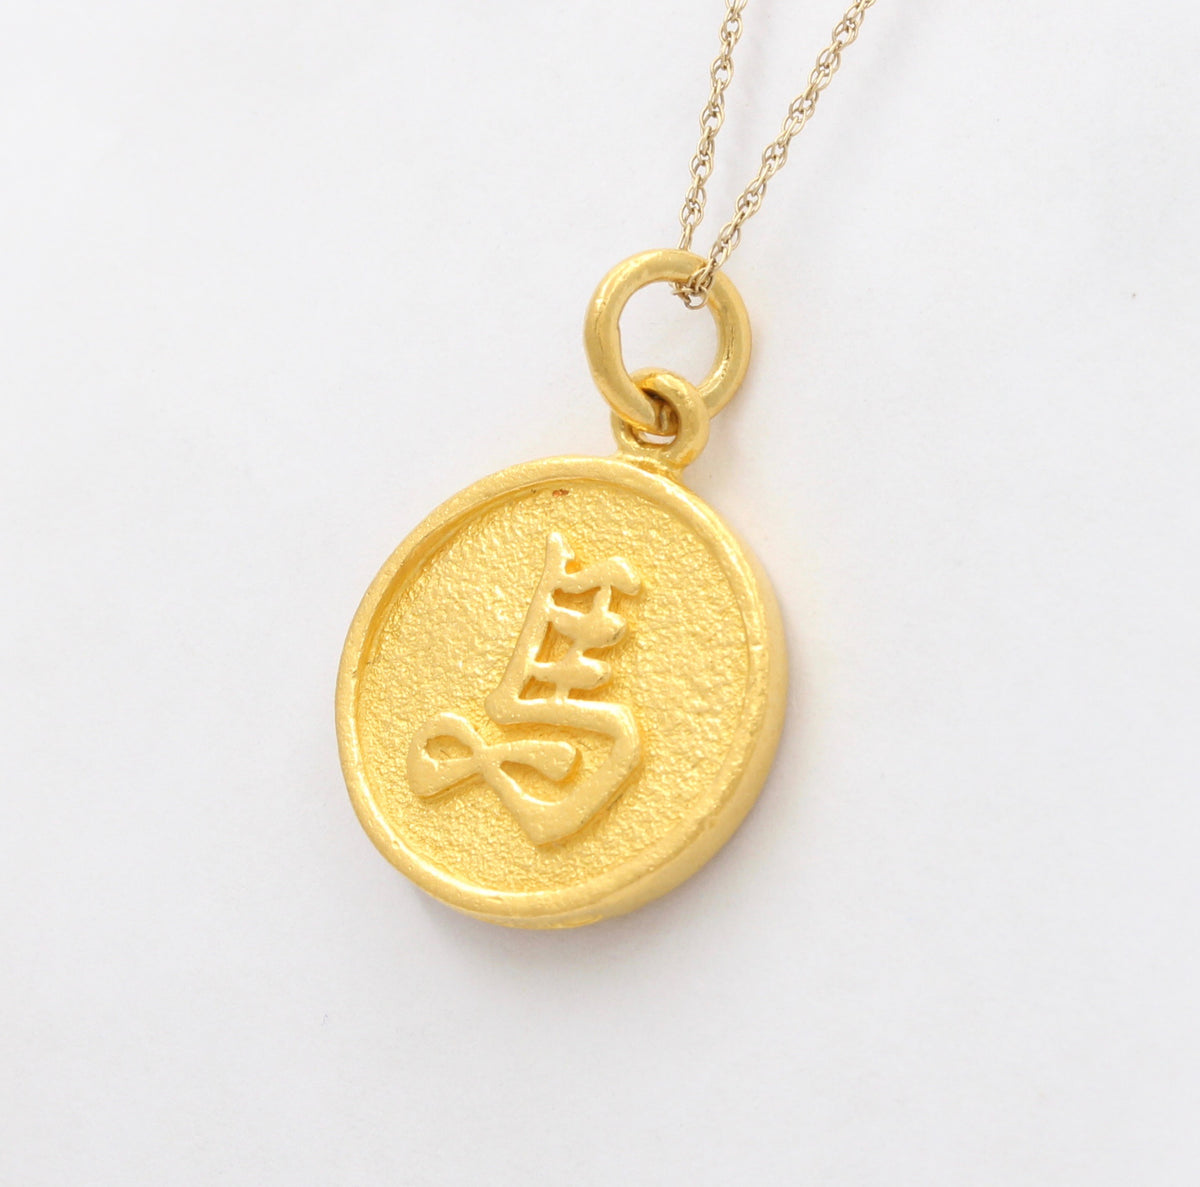 Year of the Horse Zodiac 24K Gold Disc Charm